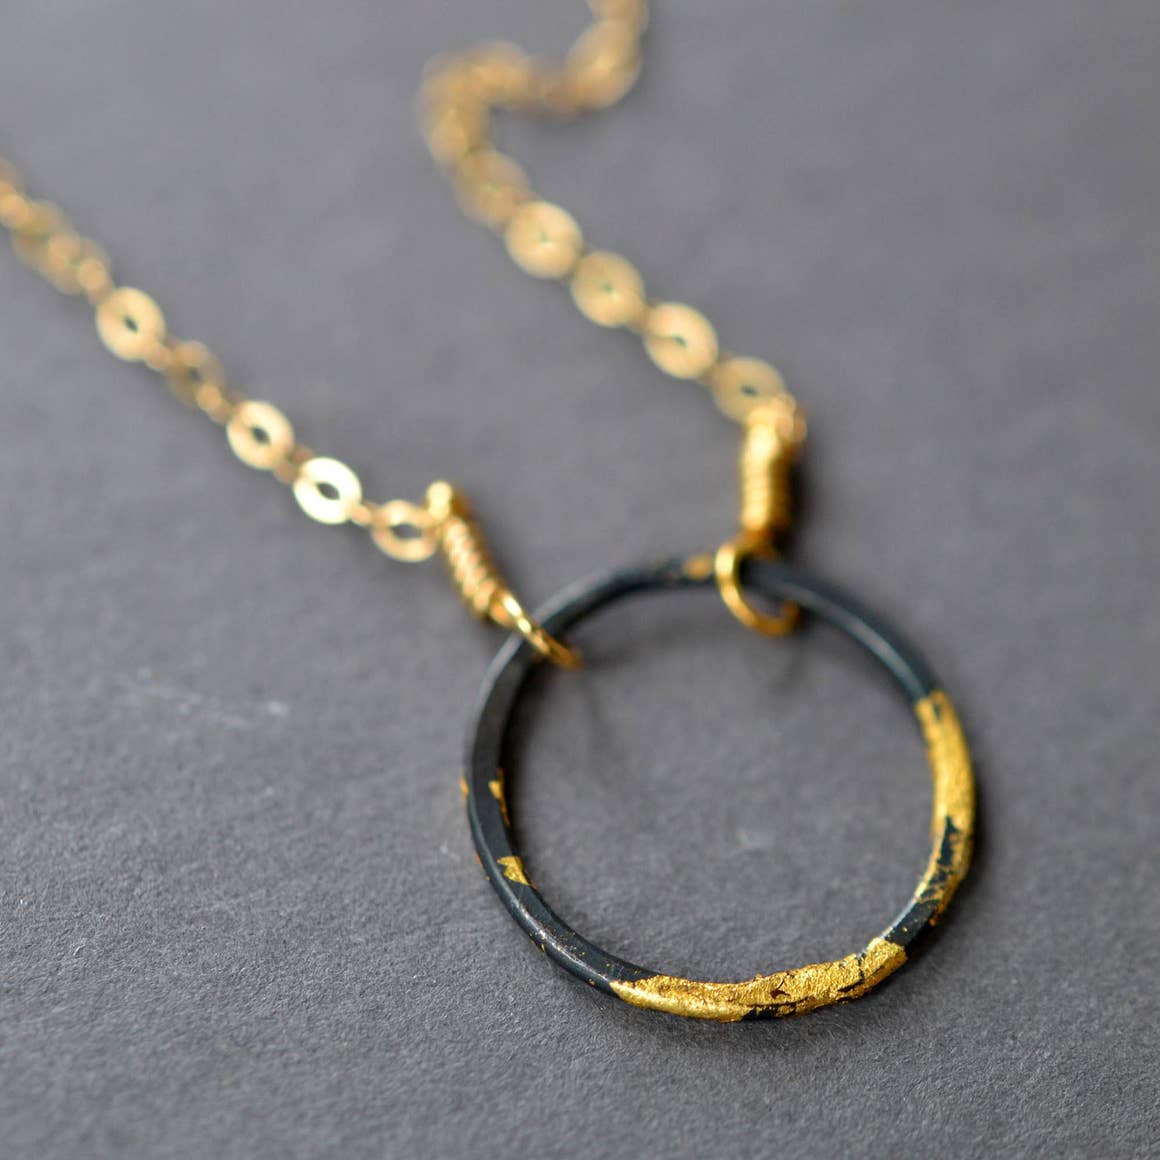 Steel and 23k gold circle necklace